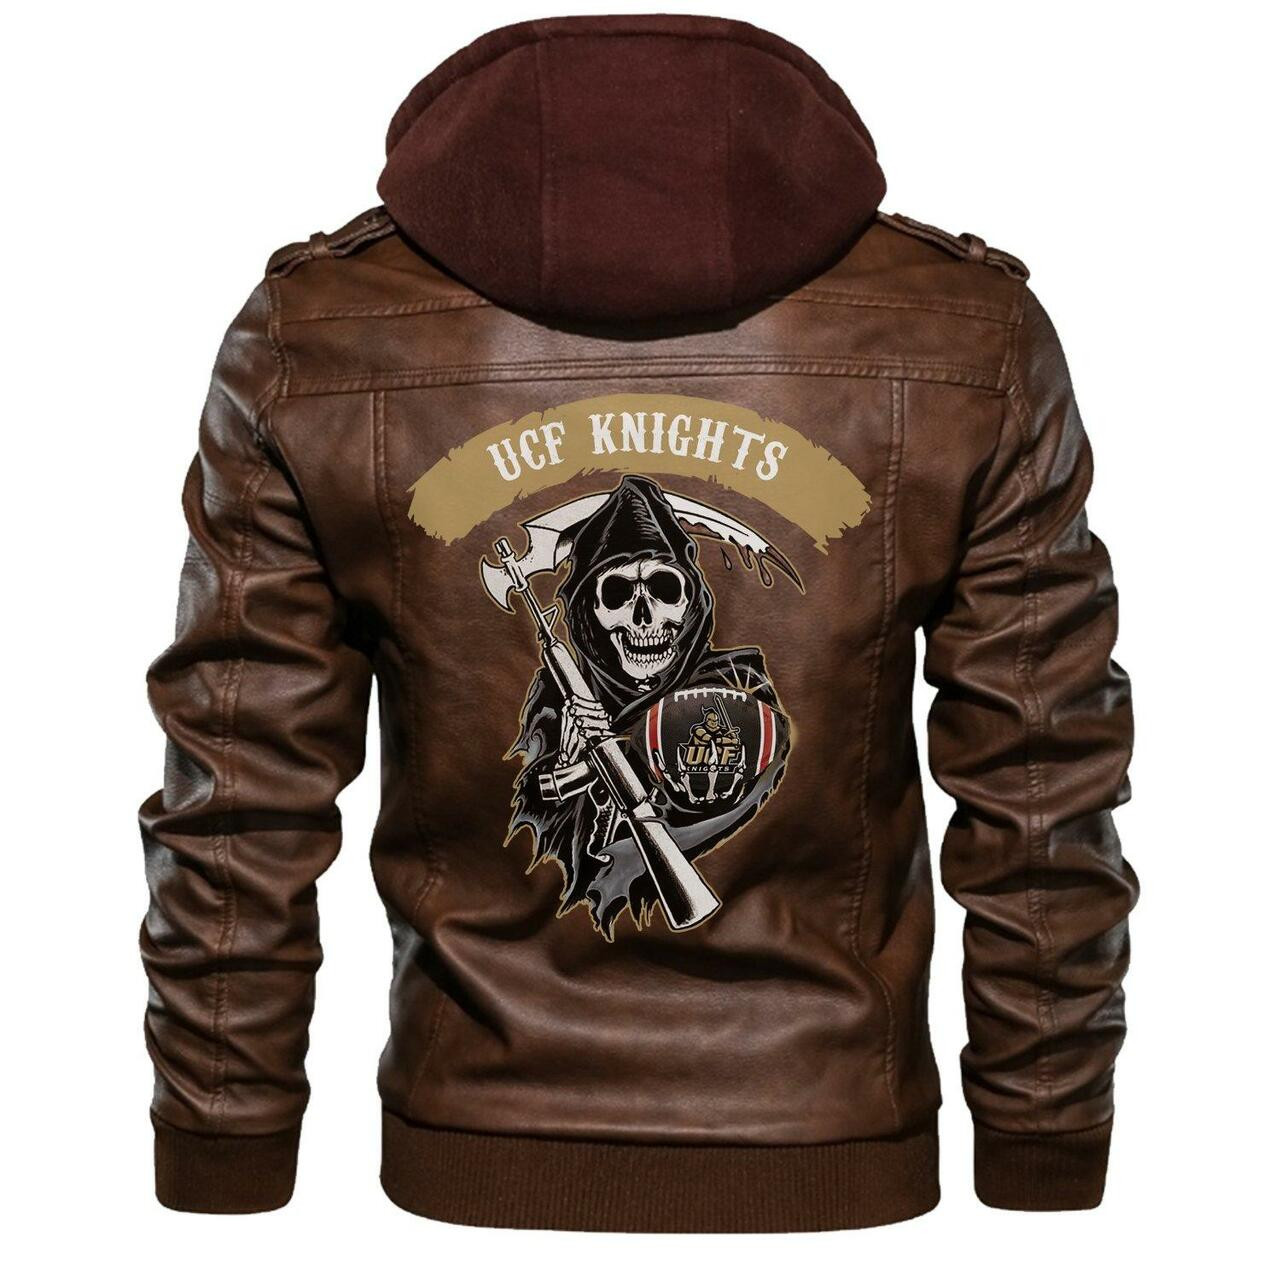 Check out and find the right leather jacket below 130